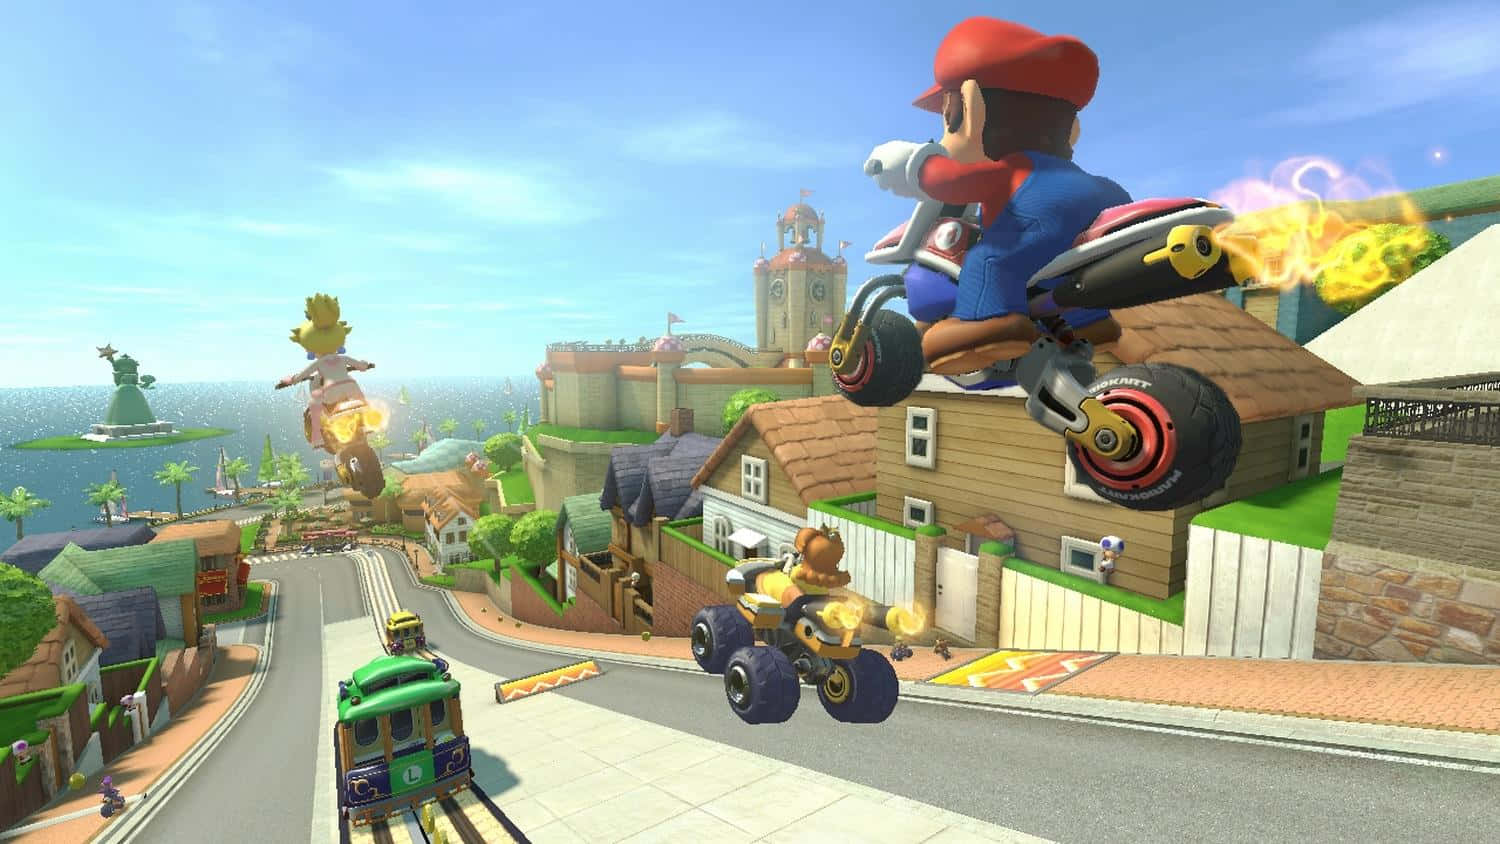 Exhilarating race with your favorite Mario Kart 8 Deluxe characters Wallpaper